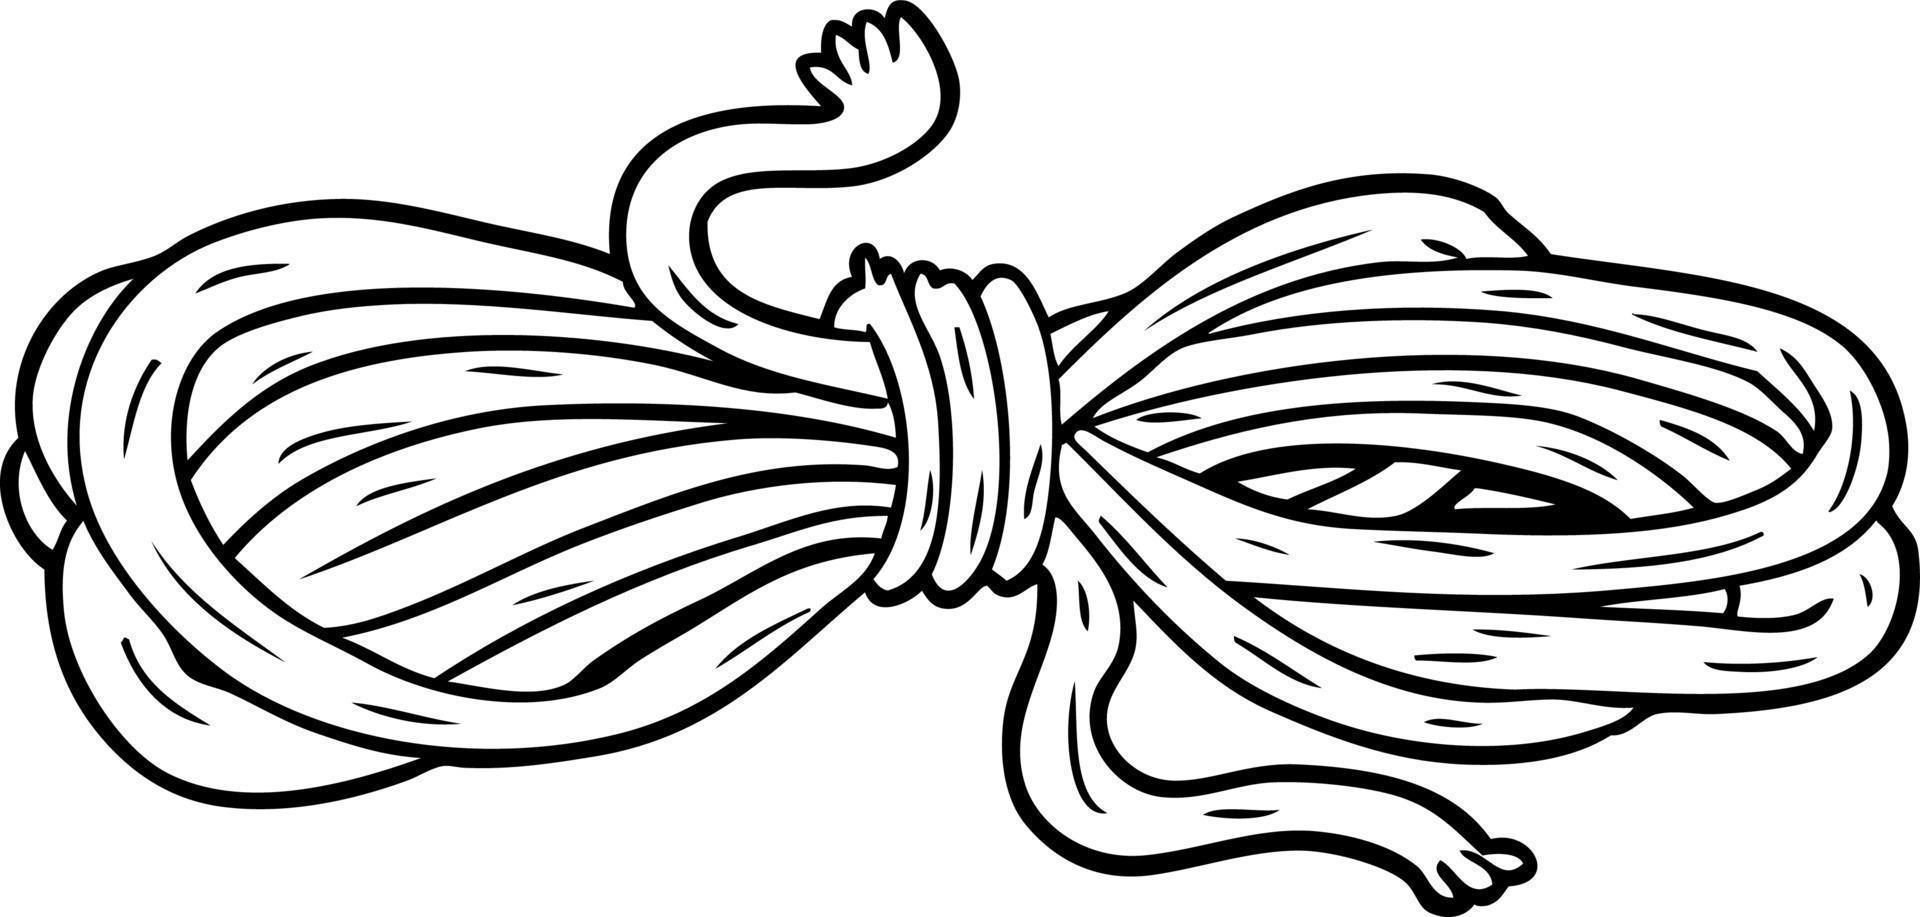 line drawing of a rope vector